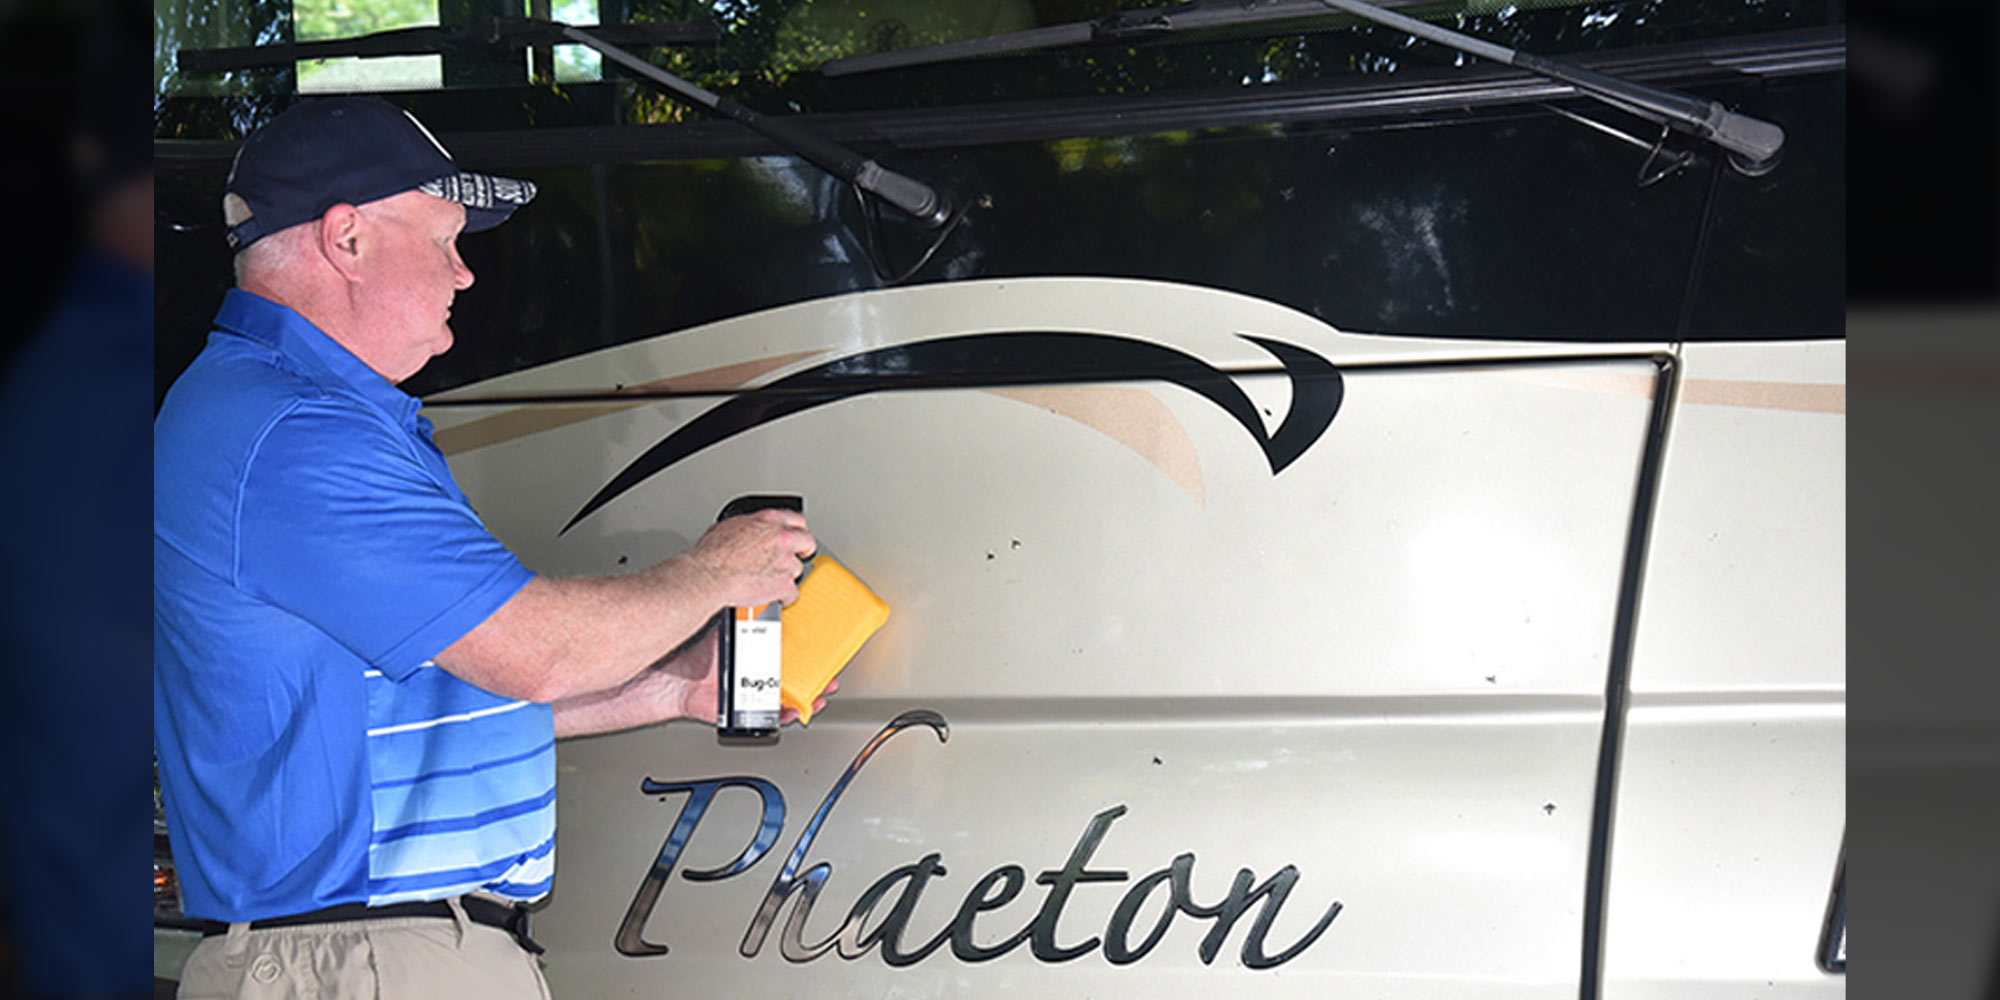 a man in a blue polo shirt applies a cleaner to the front of an RV while holding a sponge in his other hand